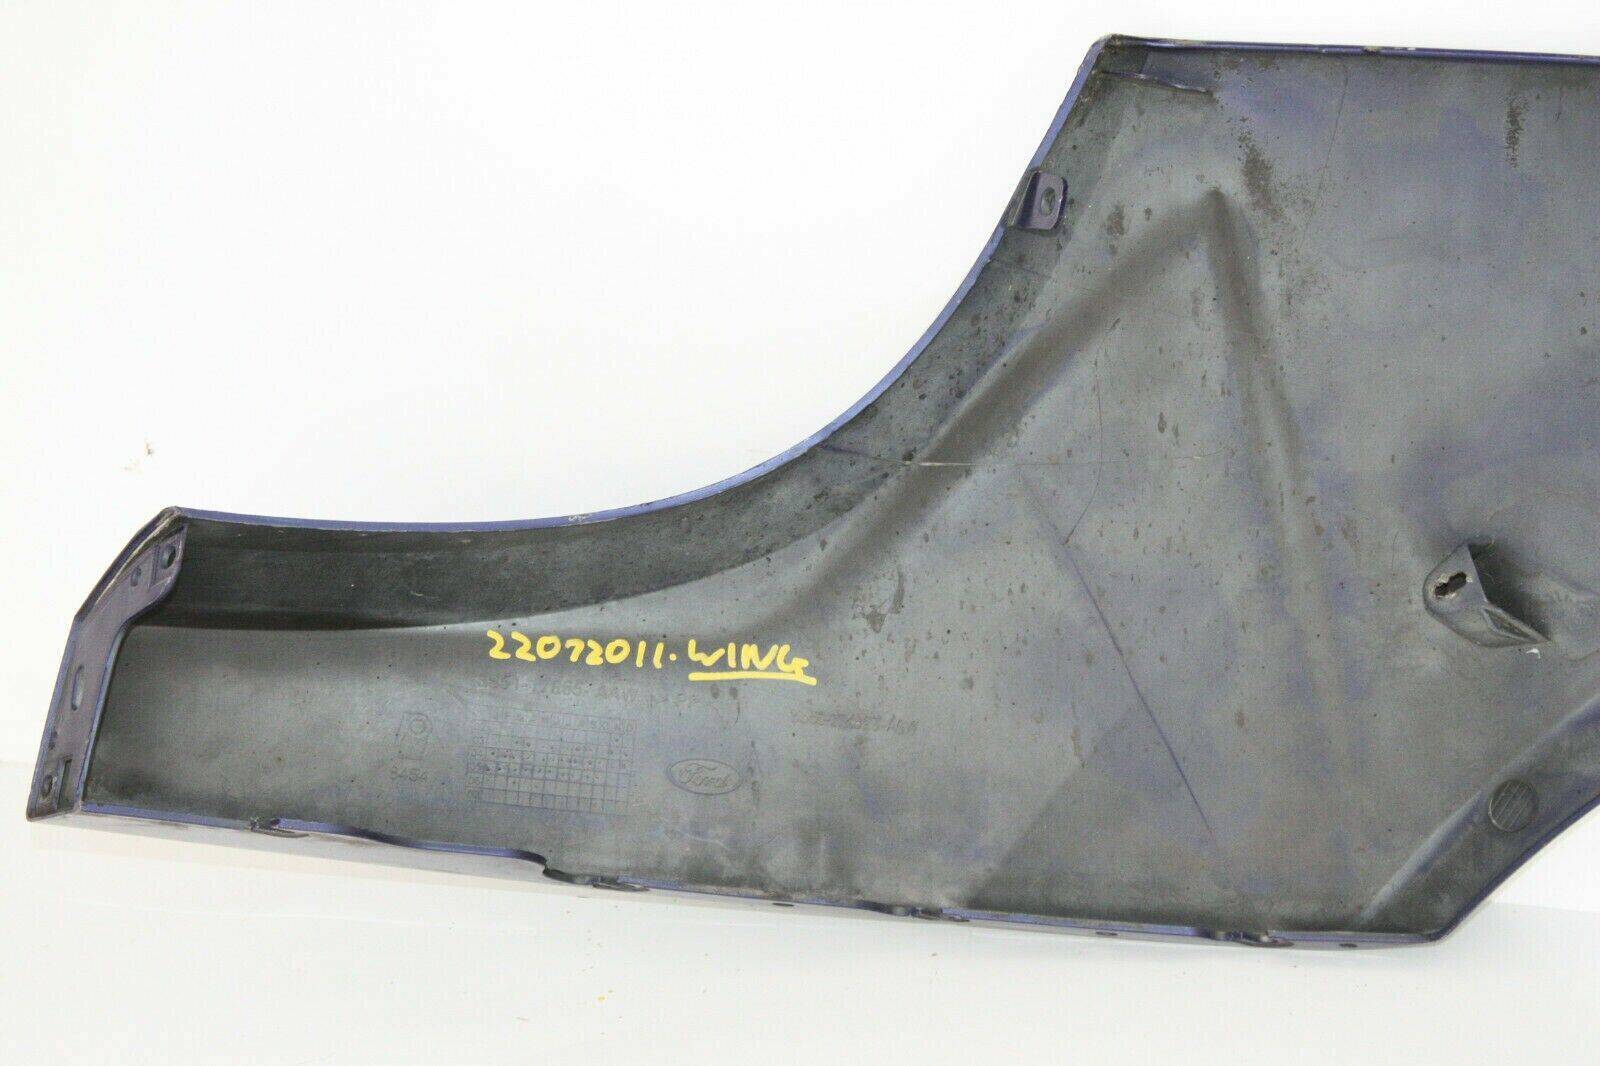 FORD-KA-SPORTKA-REAR-BUMPER-RIGHT-LOWER-SECTION-2003-TO-2008-175430905120-10